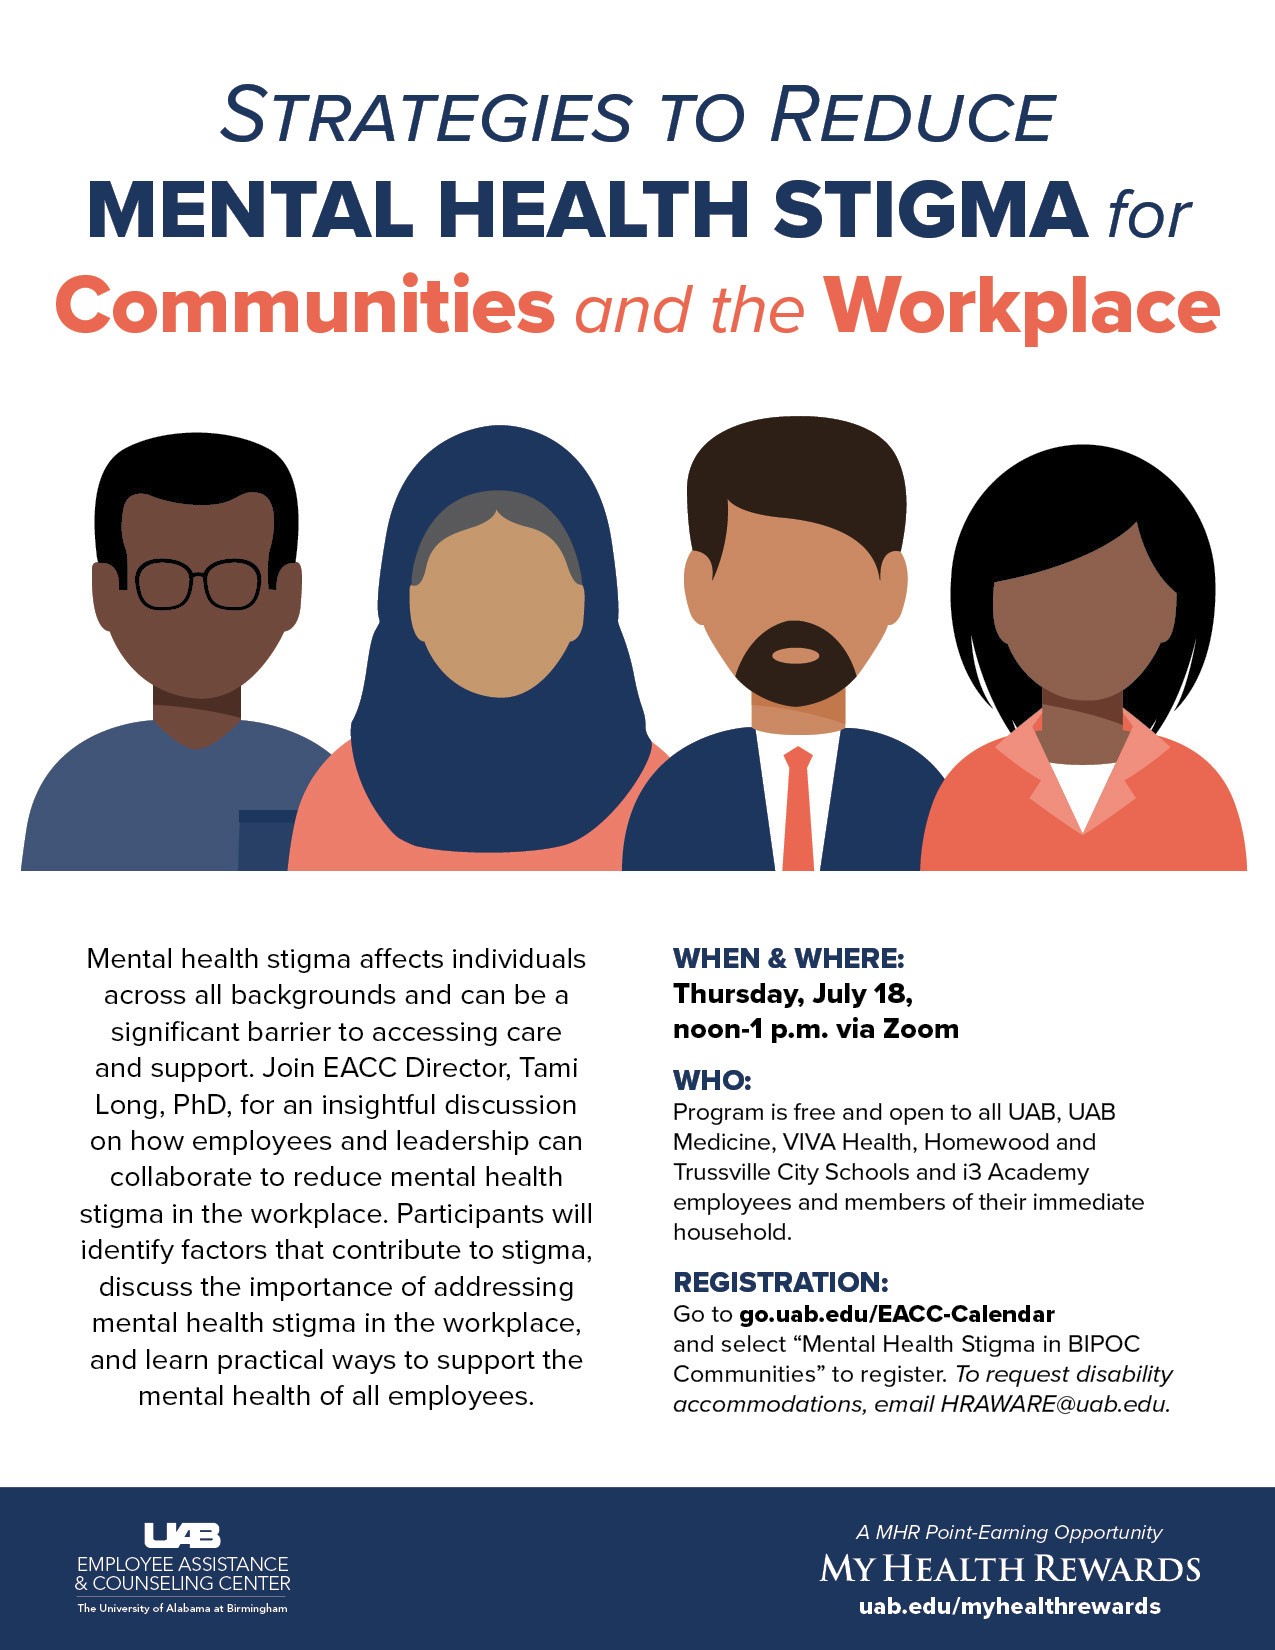 Mental Health Stigma for Communities and the Workplace